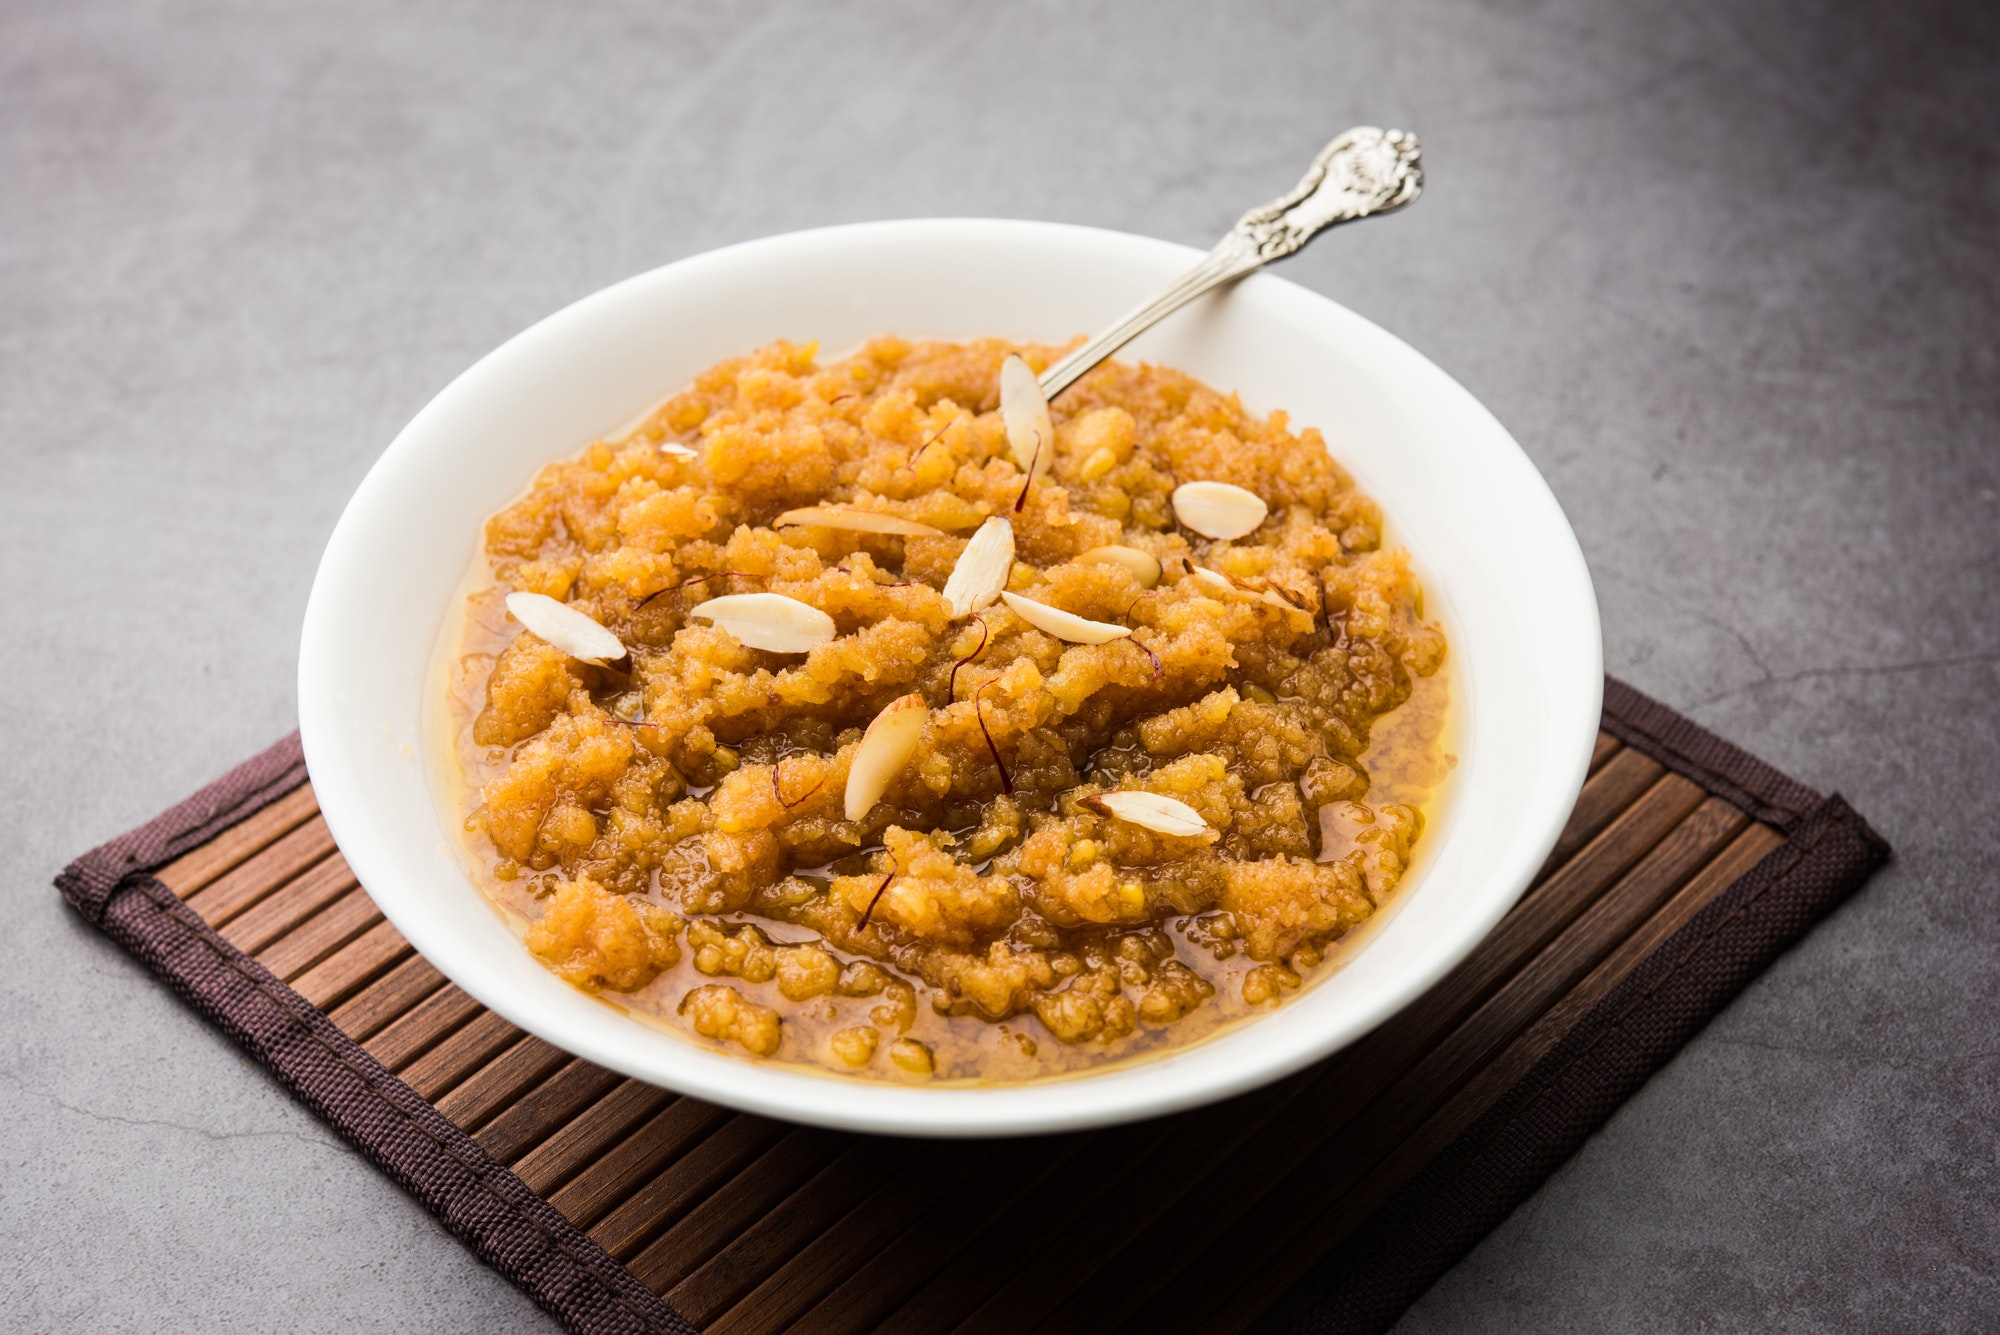 Moong Dal Halwa or Mung Daal Halva is an Indian sweet / dessert recipe, garnished with dry fruits